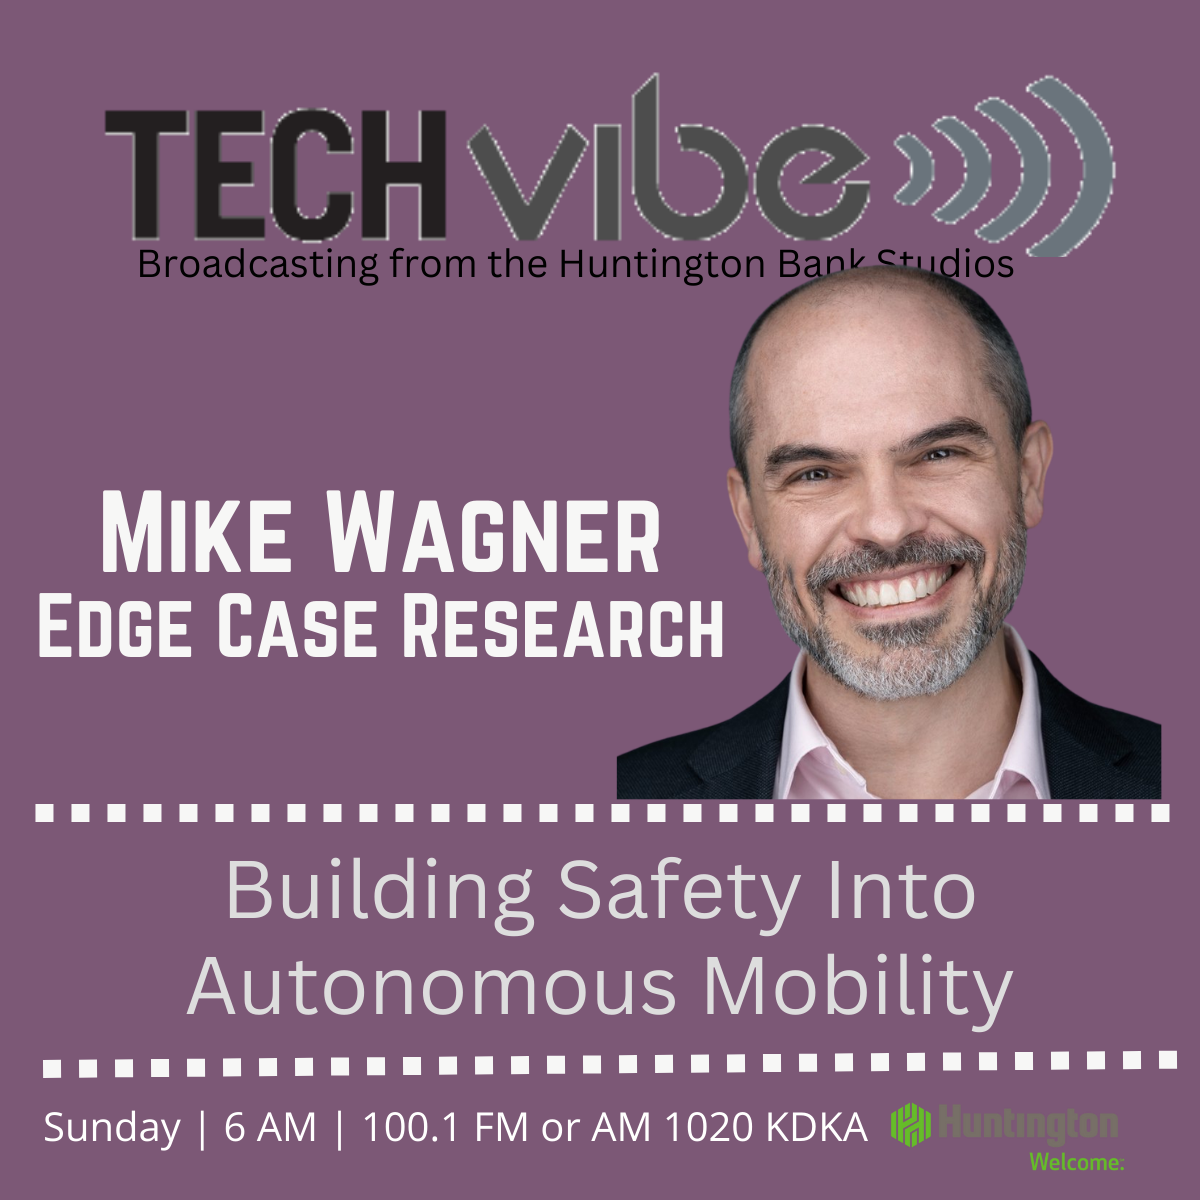 Mike Wagner of Edge Case Research